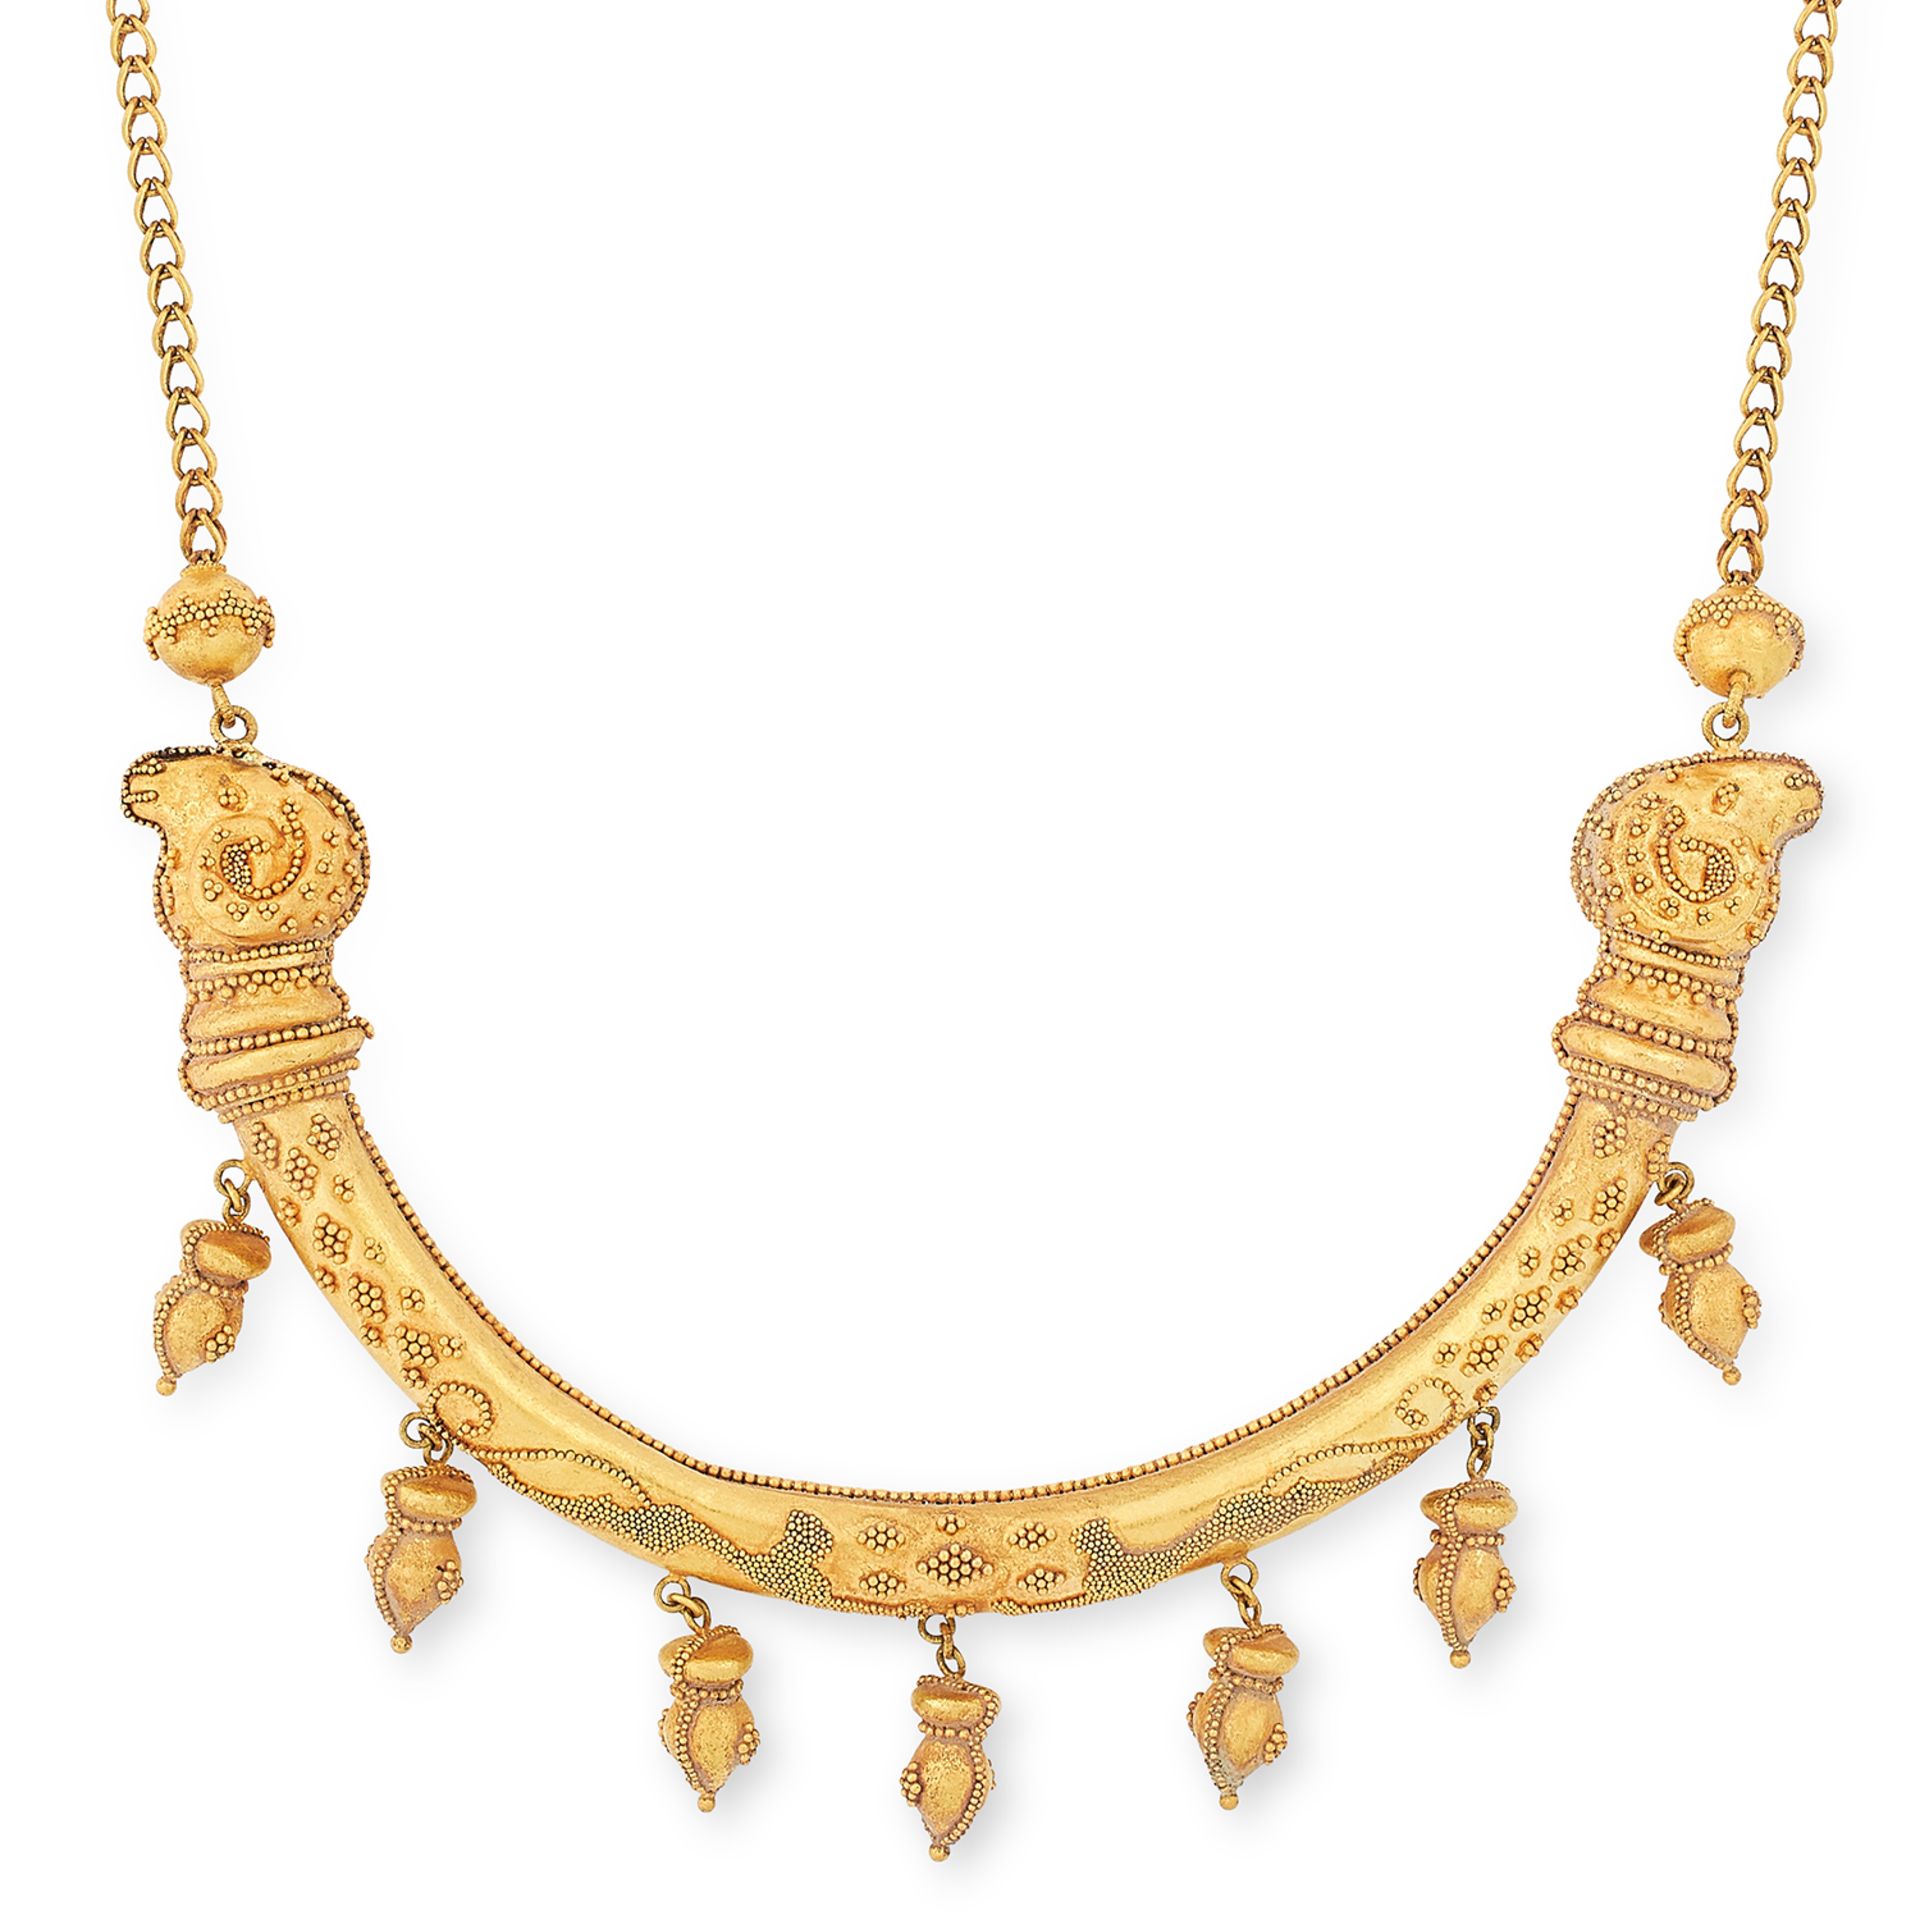 ANTIQUE FANCY LINK COLLAR NECKLACE, CIRCA 1880 formed of articulated gold links with beaded